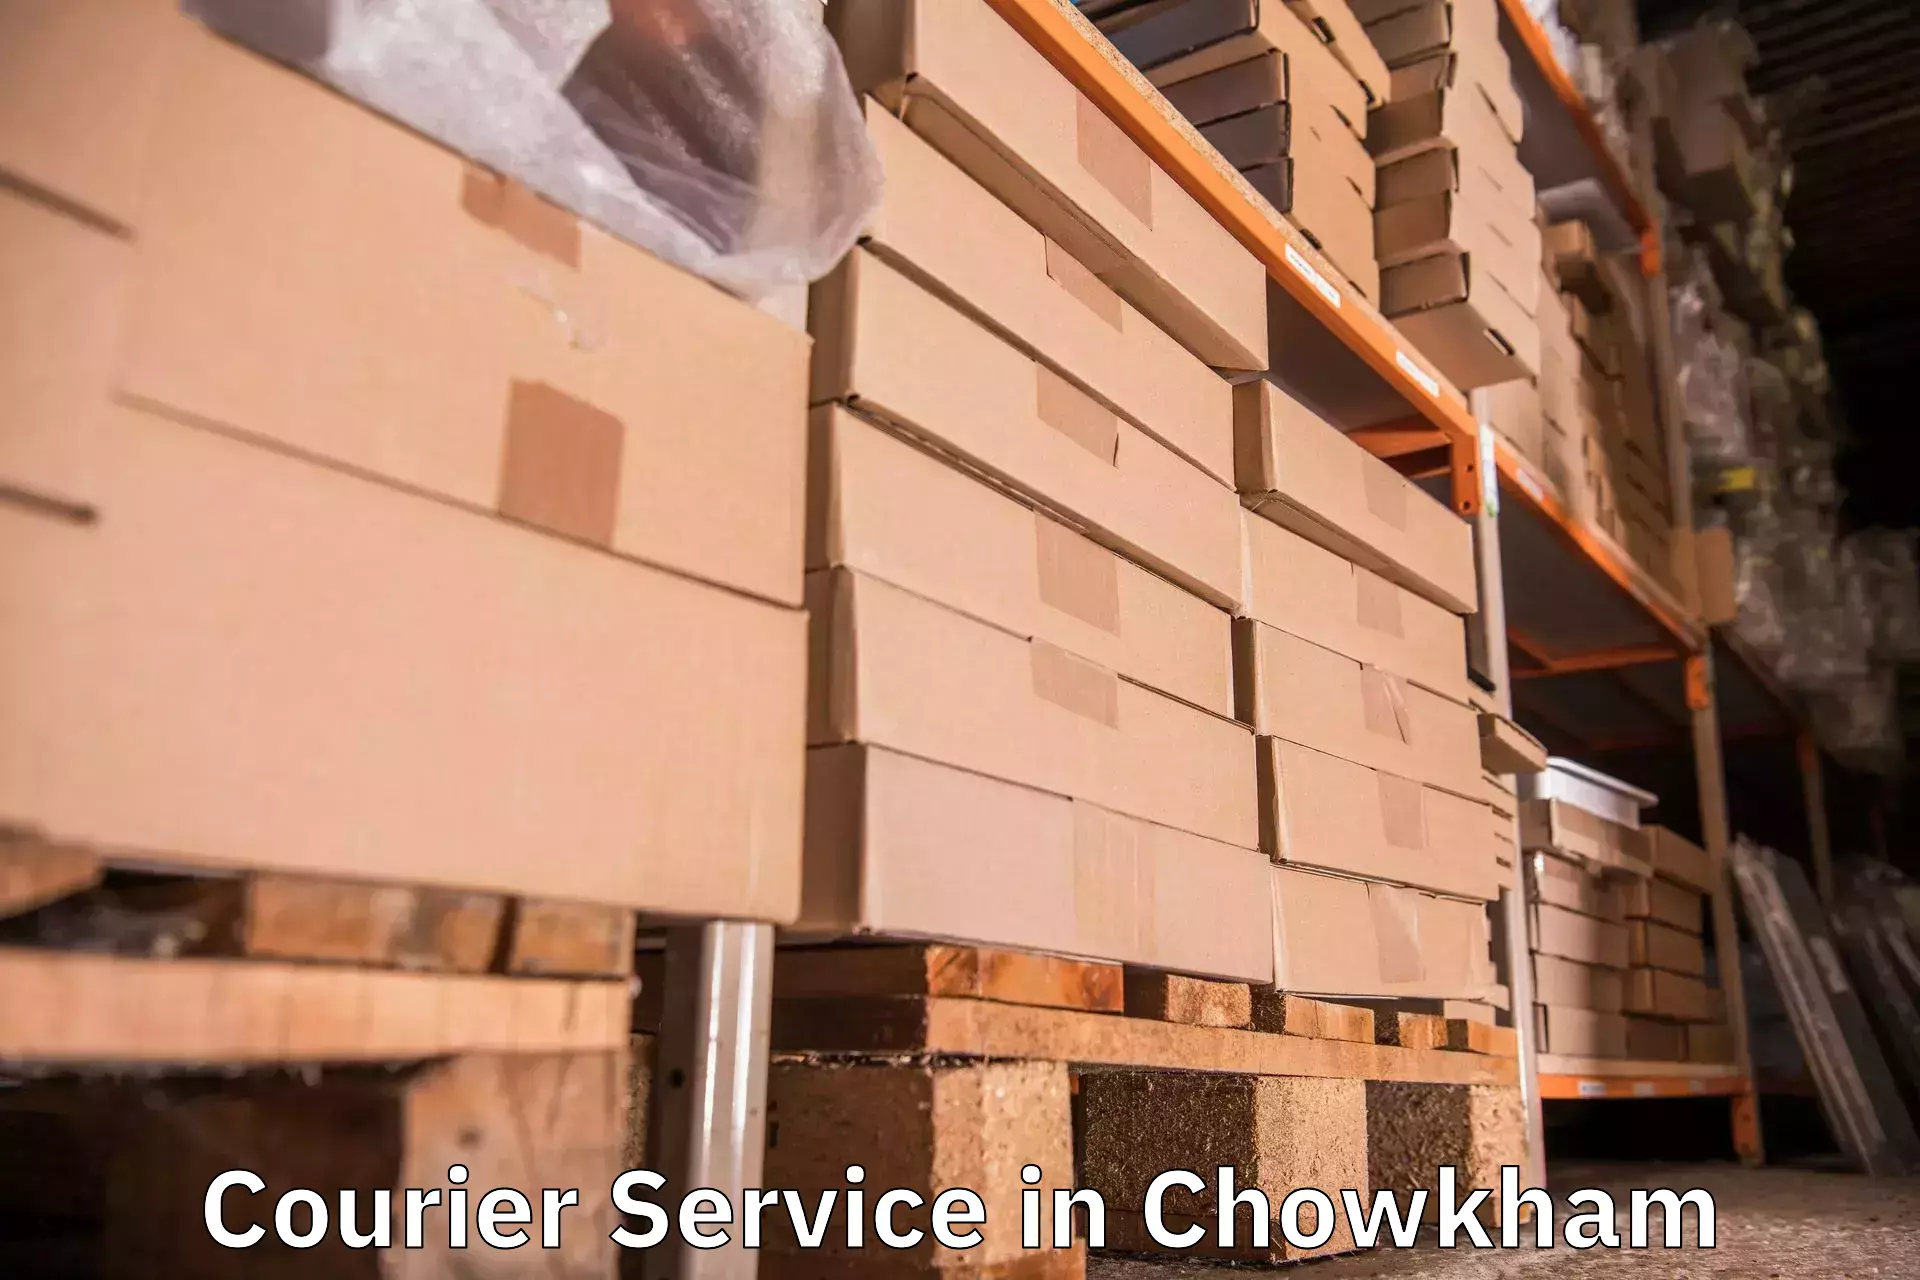 Affordable parcel rates in Chowkham